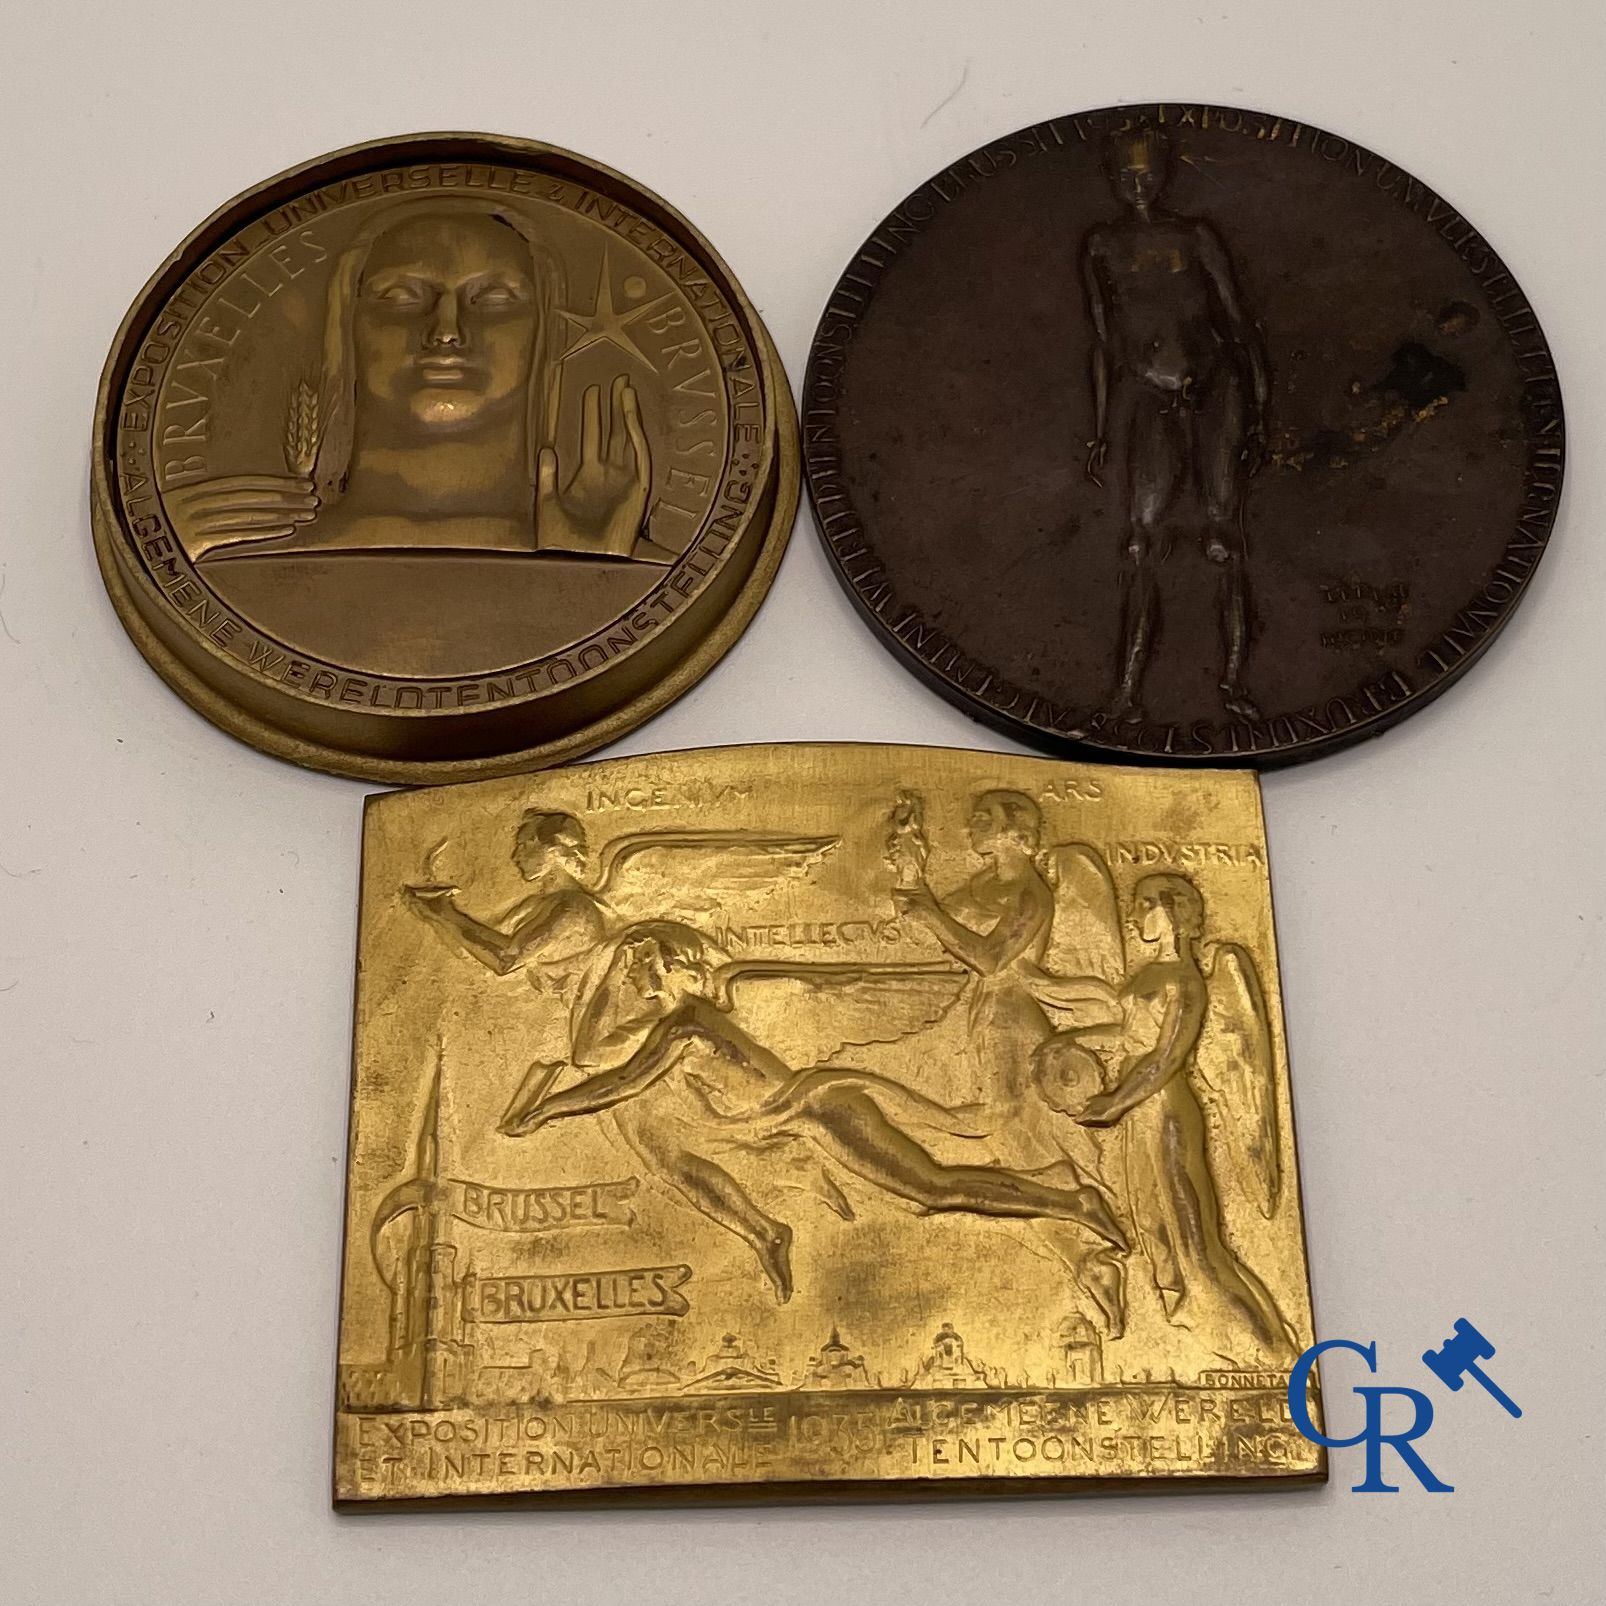 Medals: 3 bronze medals World Exhibition Brussels 1935 and 1958.